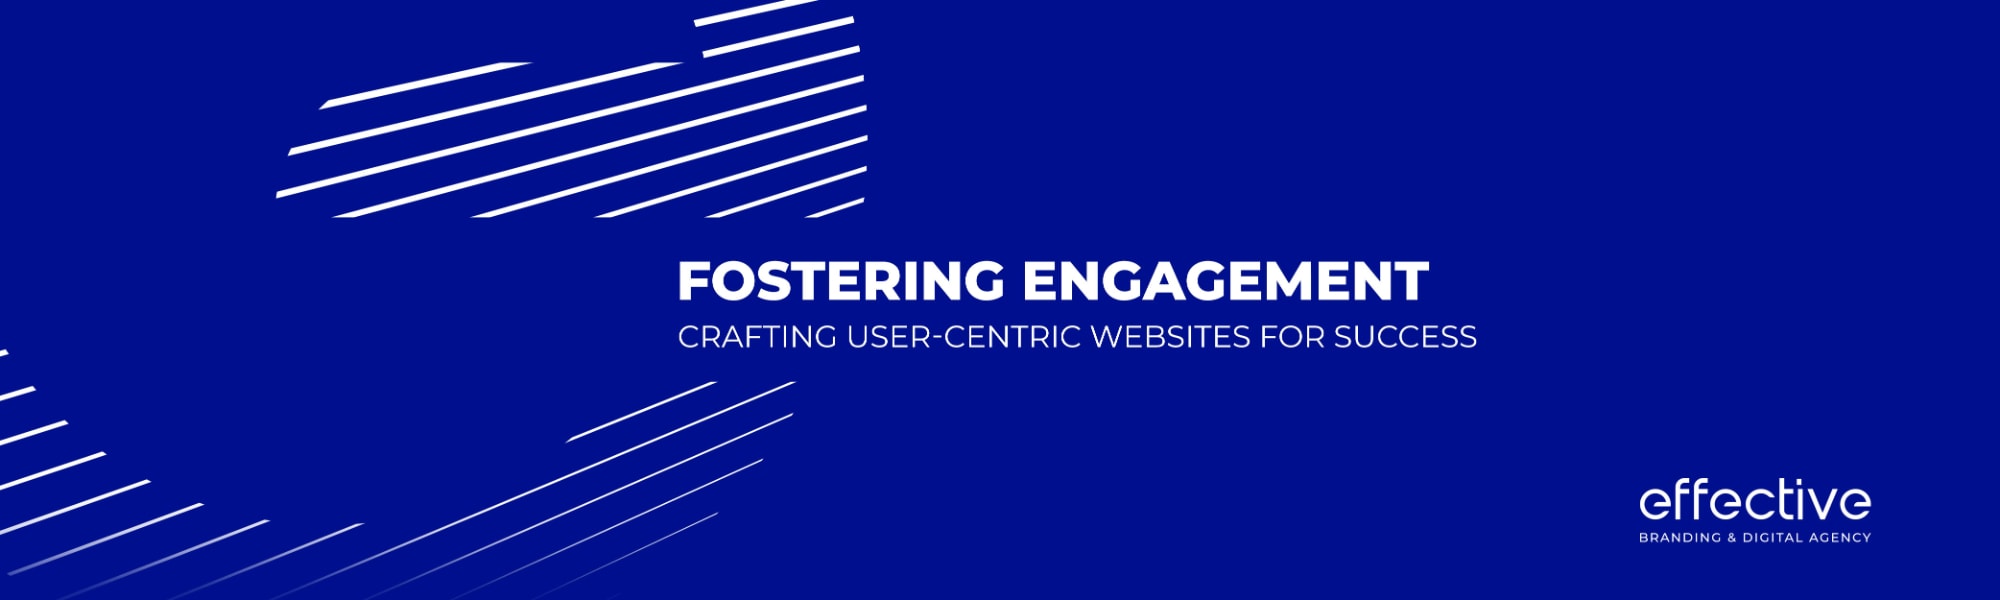 Fostering Engagement Crafting User Centric Websites for Success